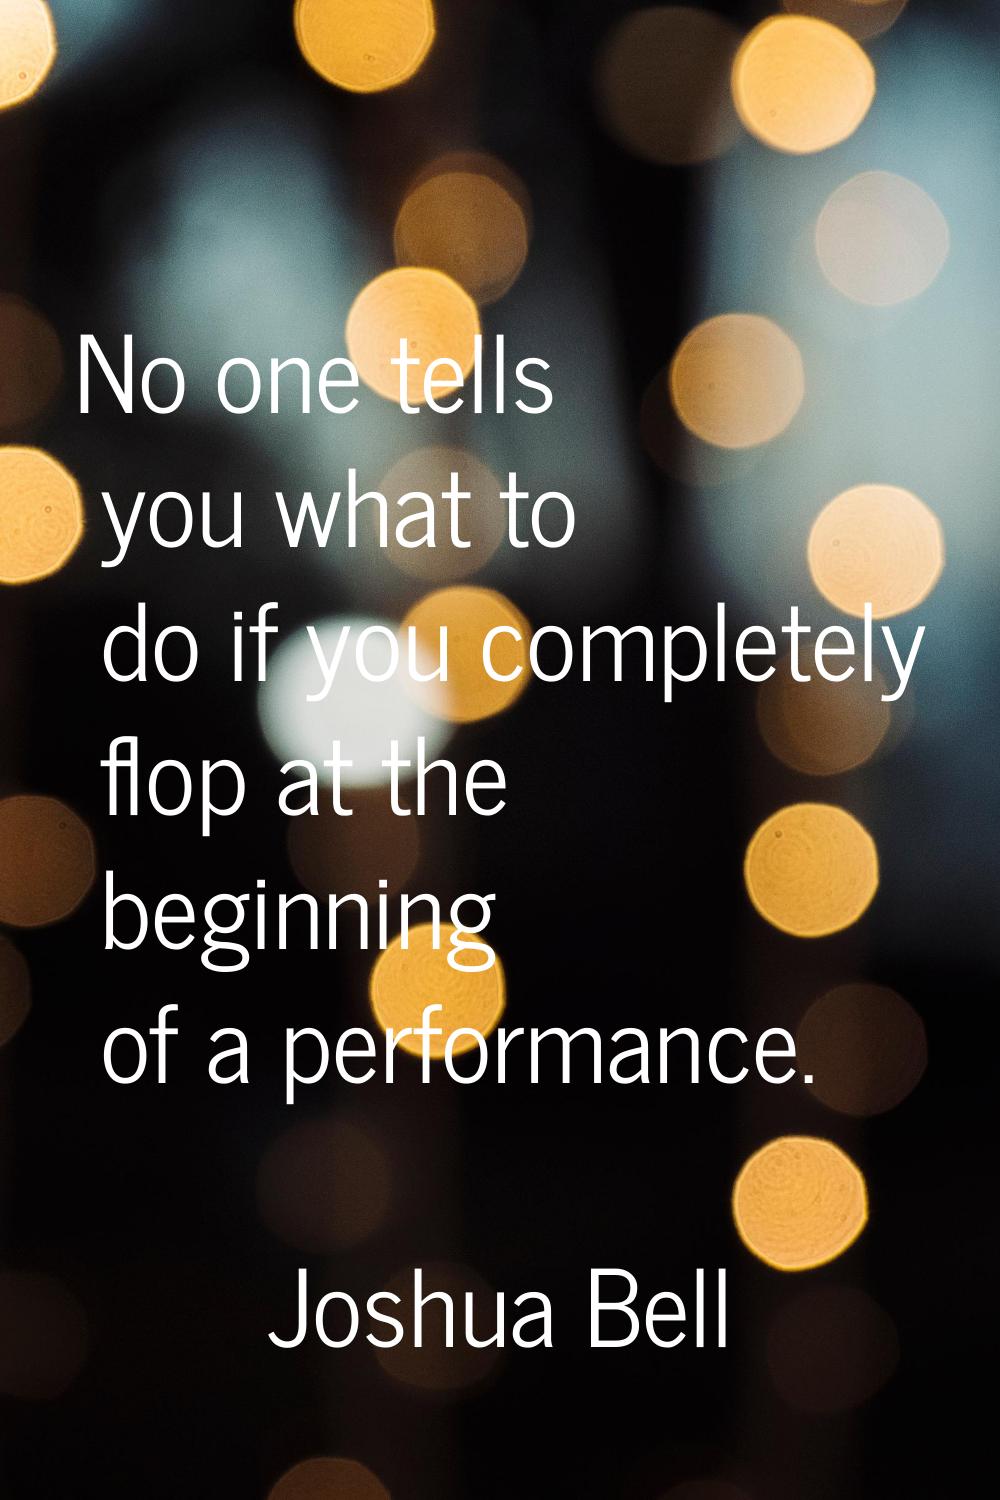 No one tells you what to do if you completely flop at the beginning of a performance.